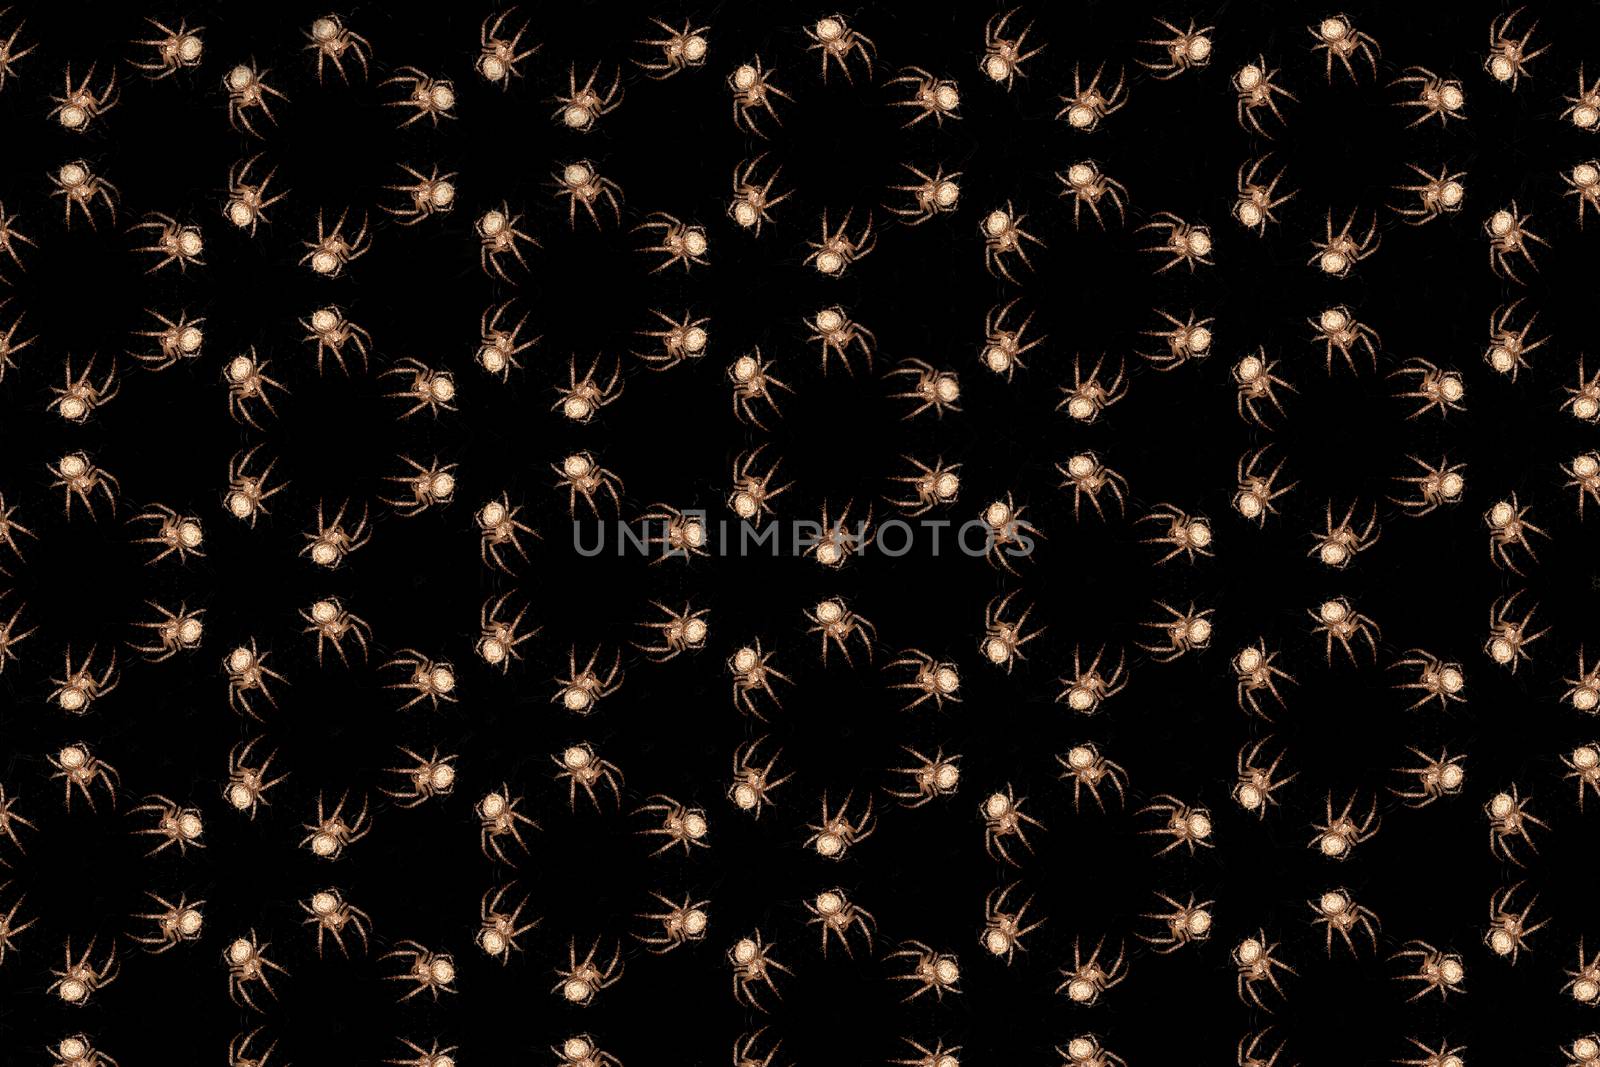 Symmetrical Vector image of a spider of a light brown color on a black background